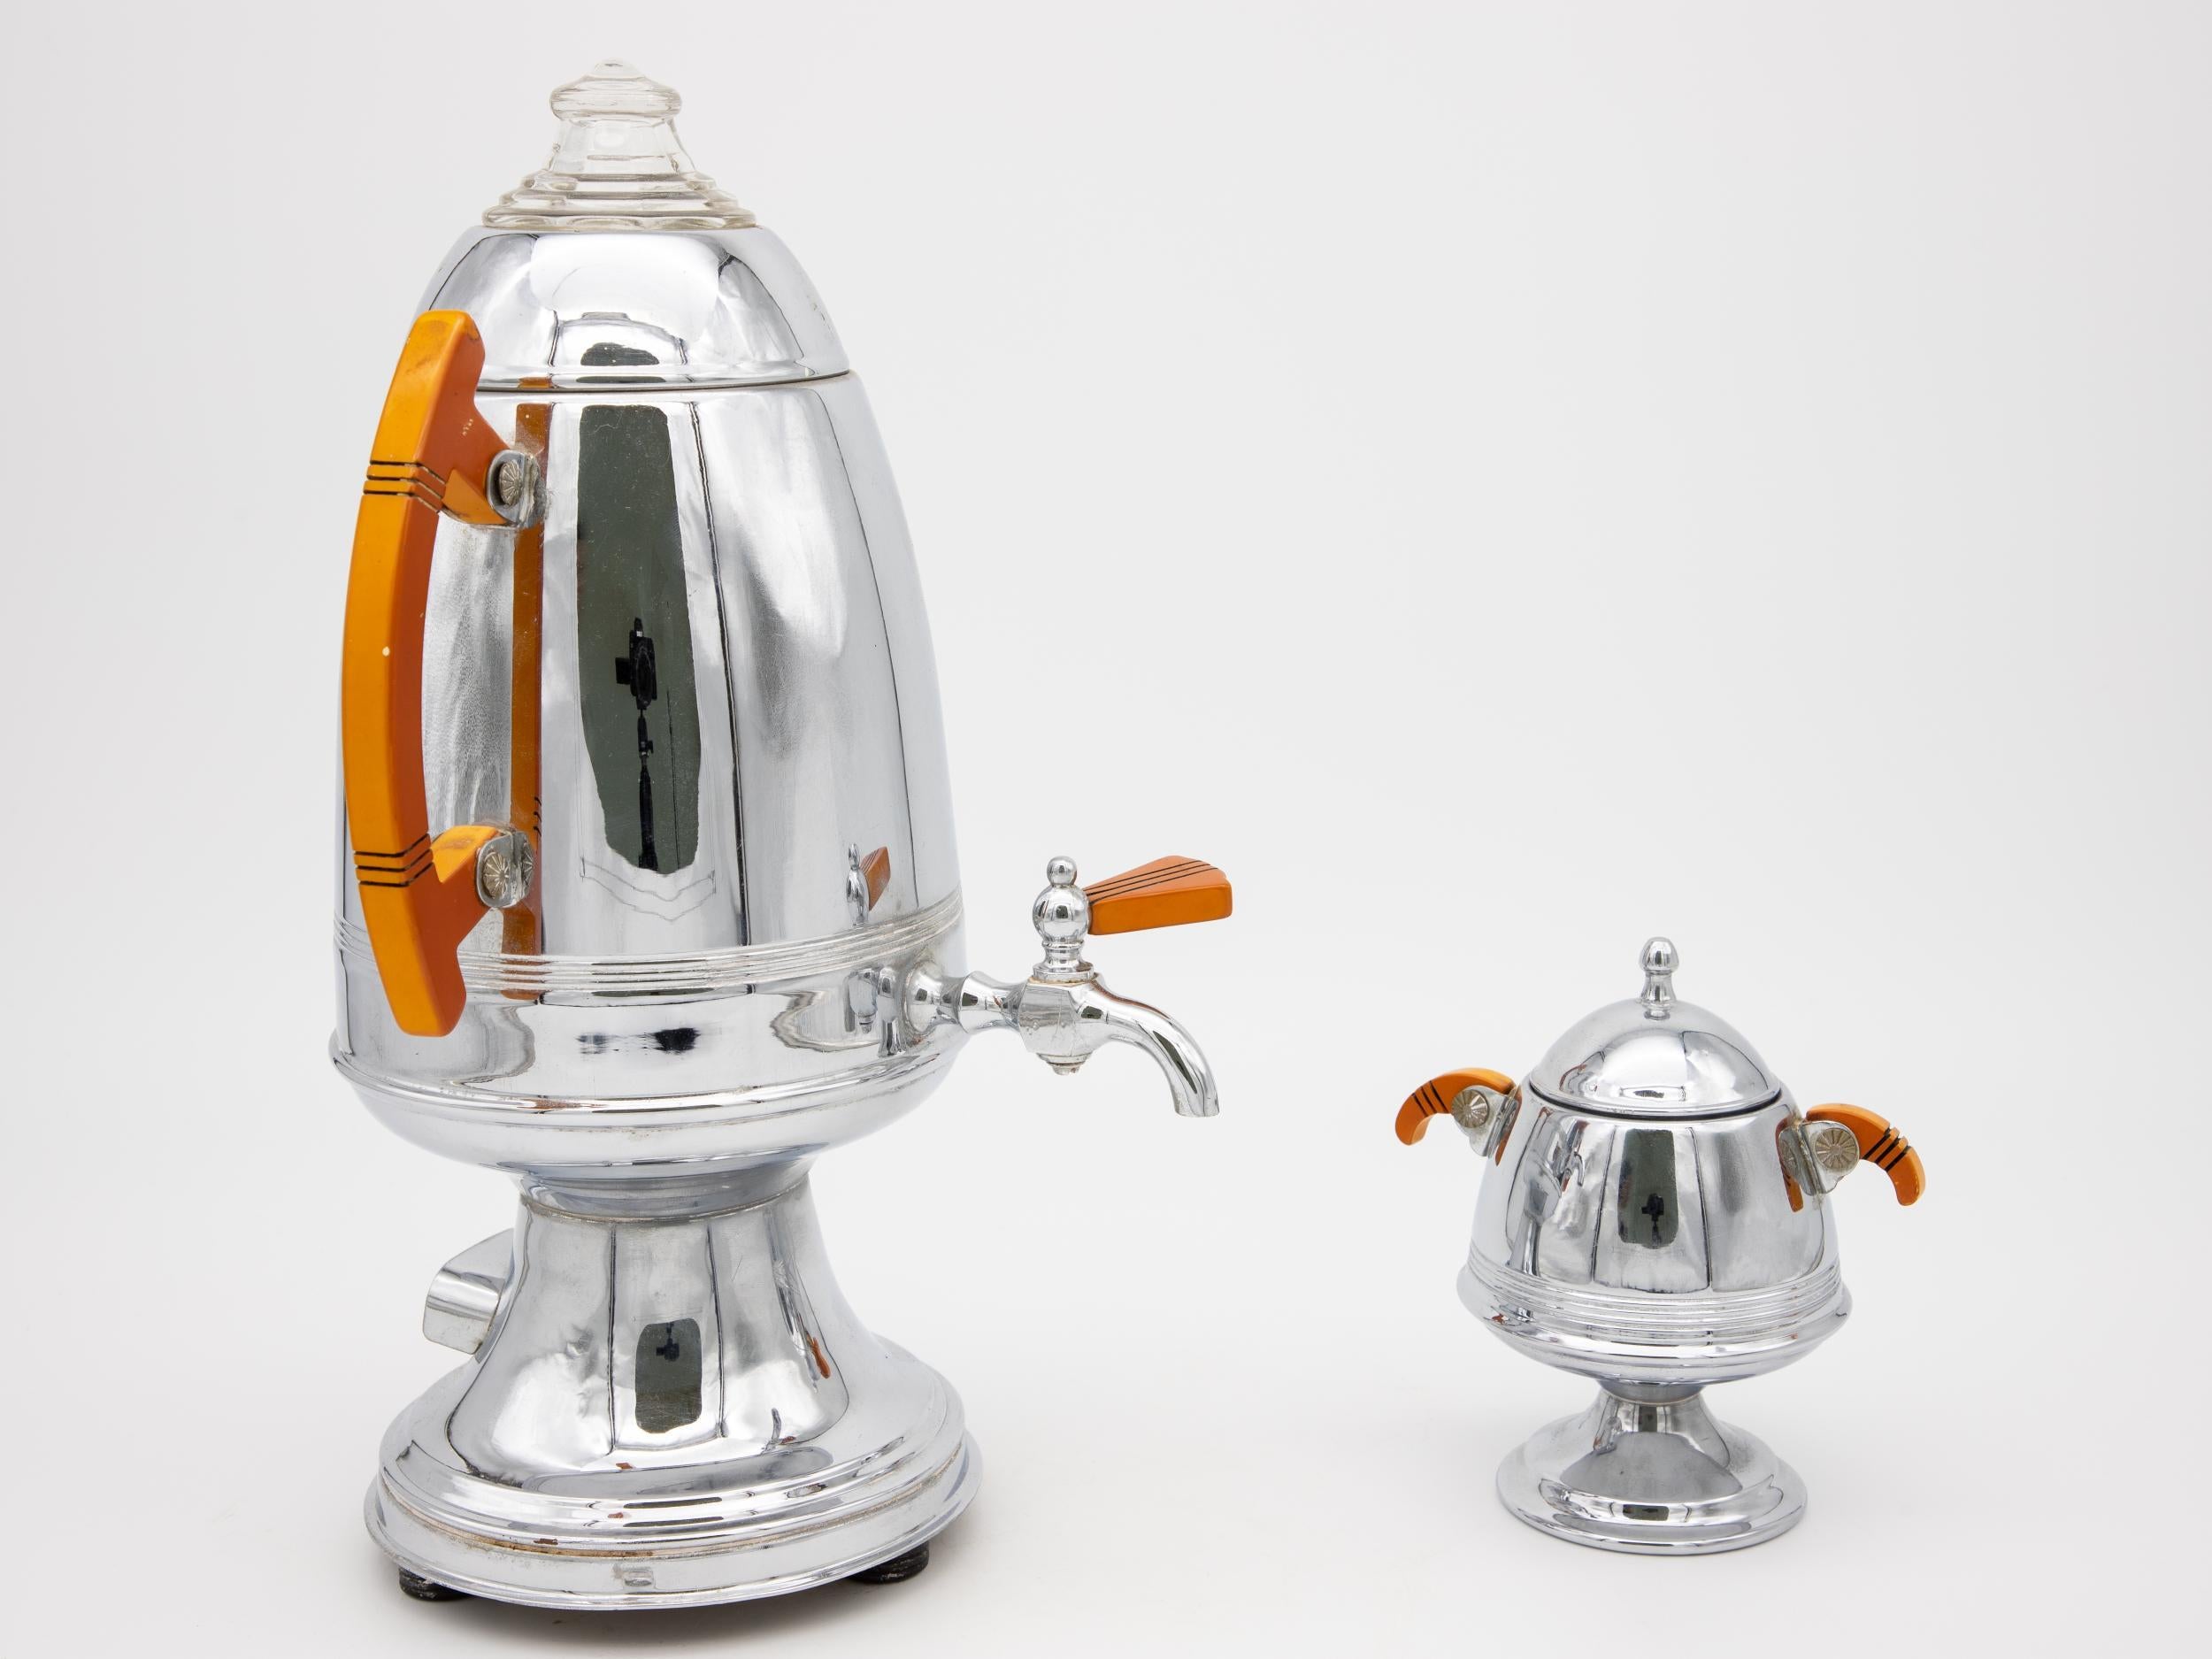 An Art Deco coffee service in chrome plated aluminum with orange bakelite handles and spout. A similar example of the handles style and color was made by American company Manning-Bowman, ca. 1954. This set includes an electric percolator (missing